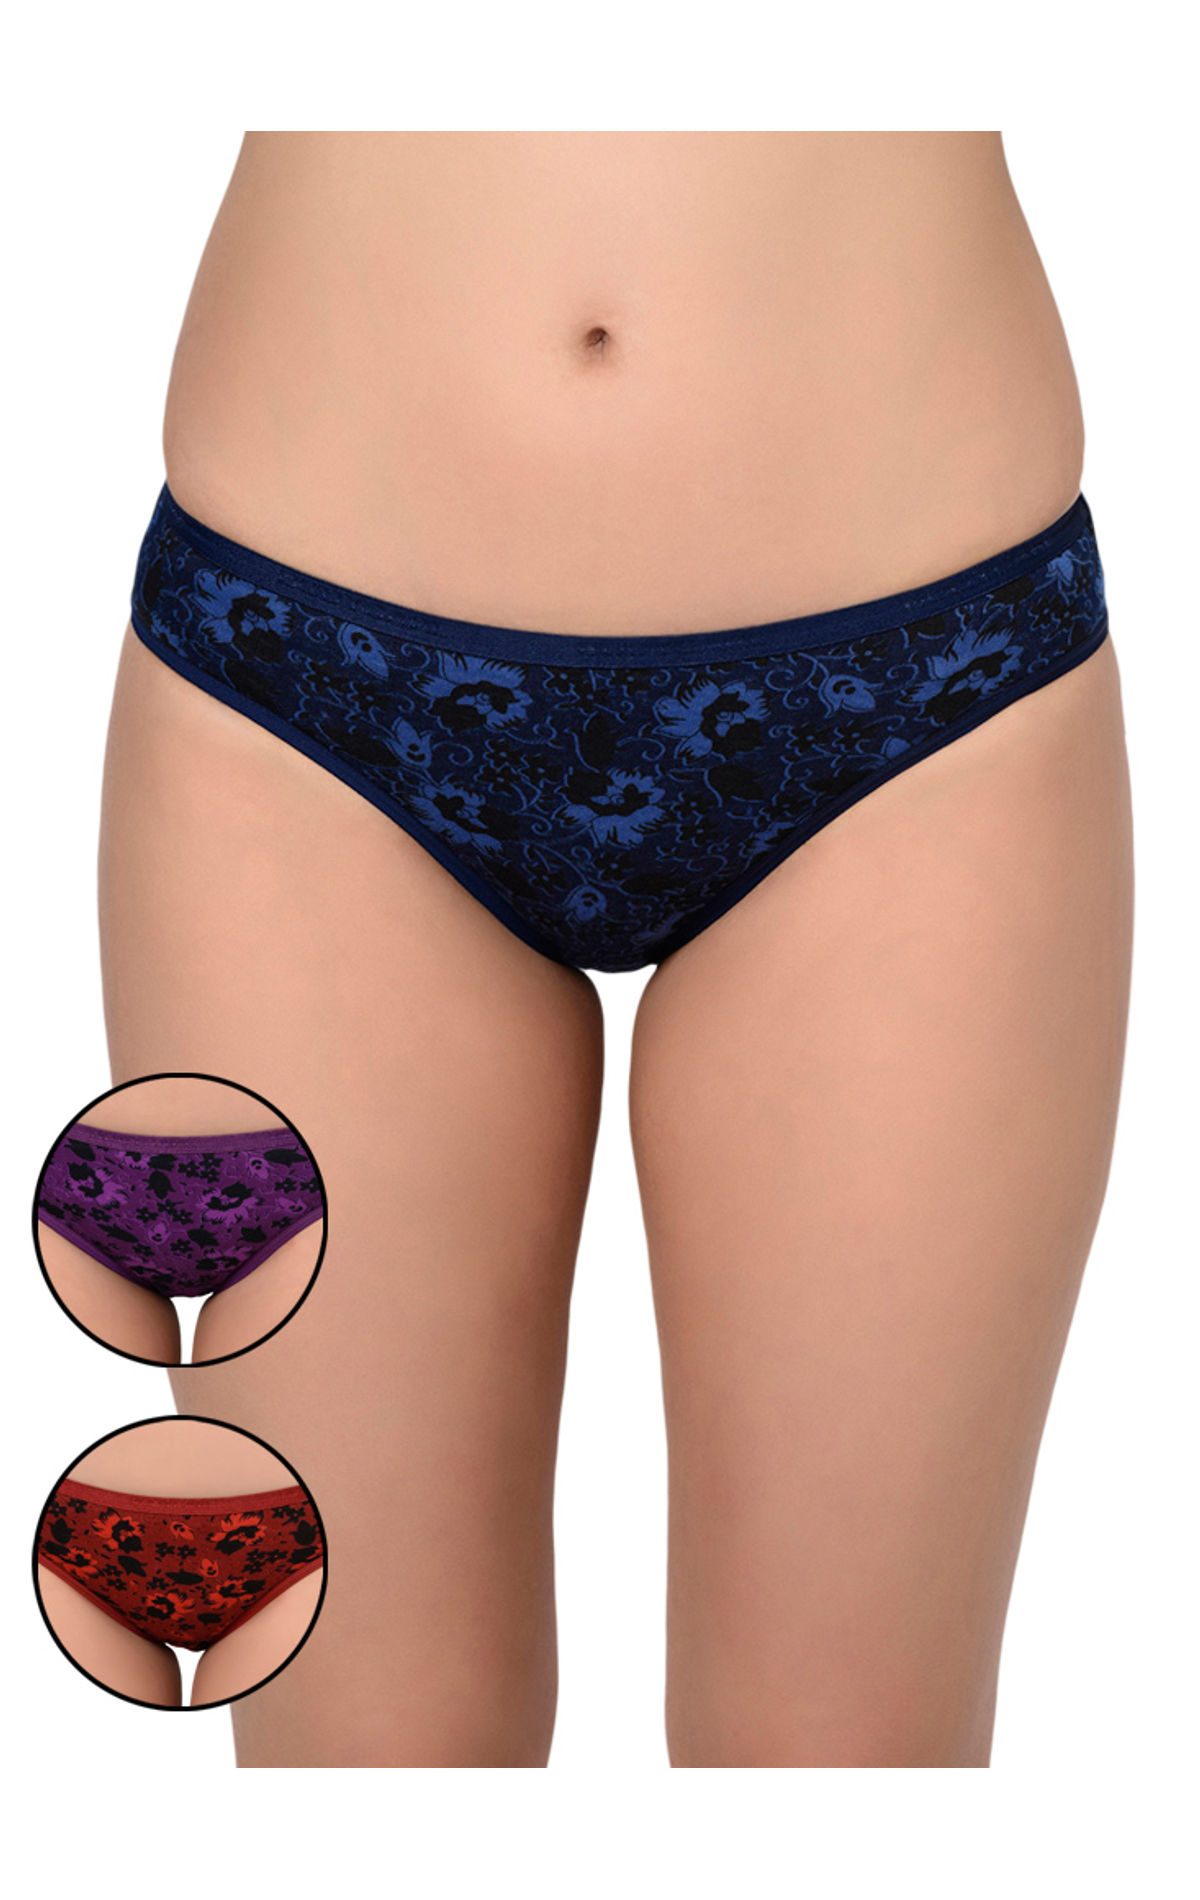 Bodycare Pack Of 3 Printed Panty In Assorted Colors-8541b-3pcs